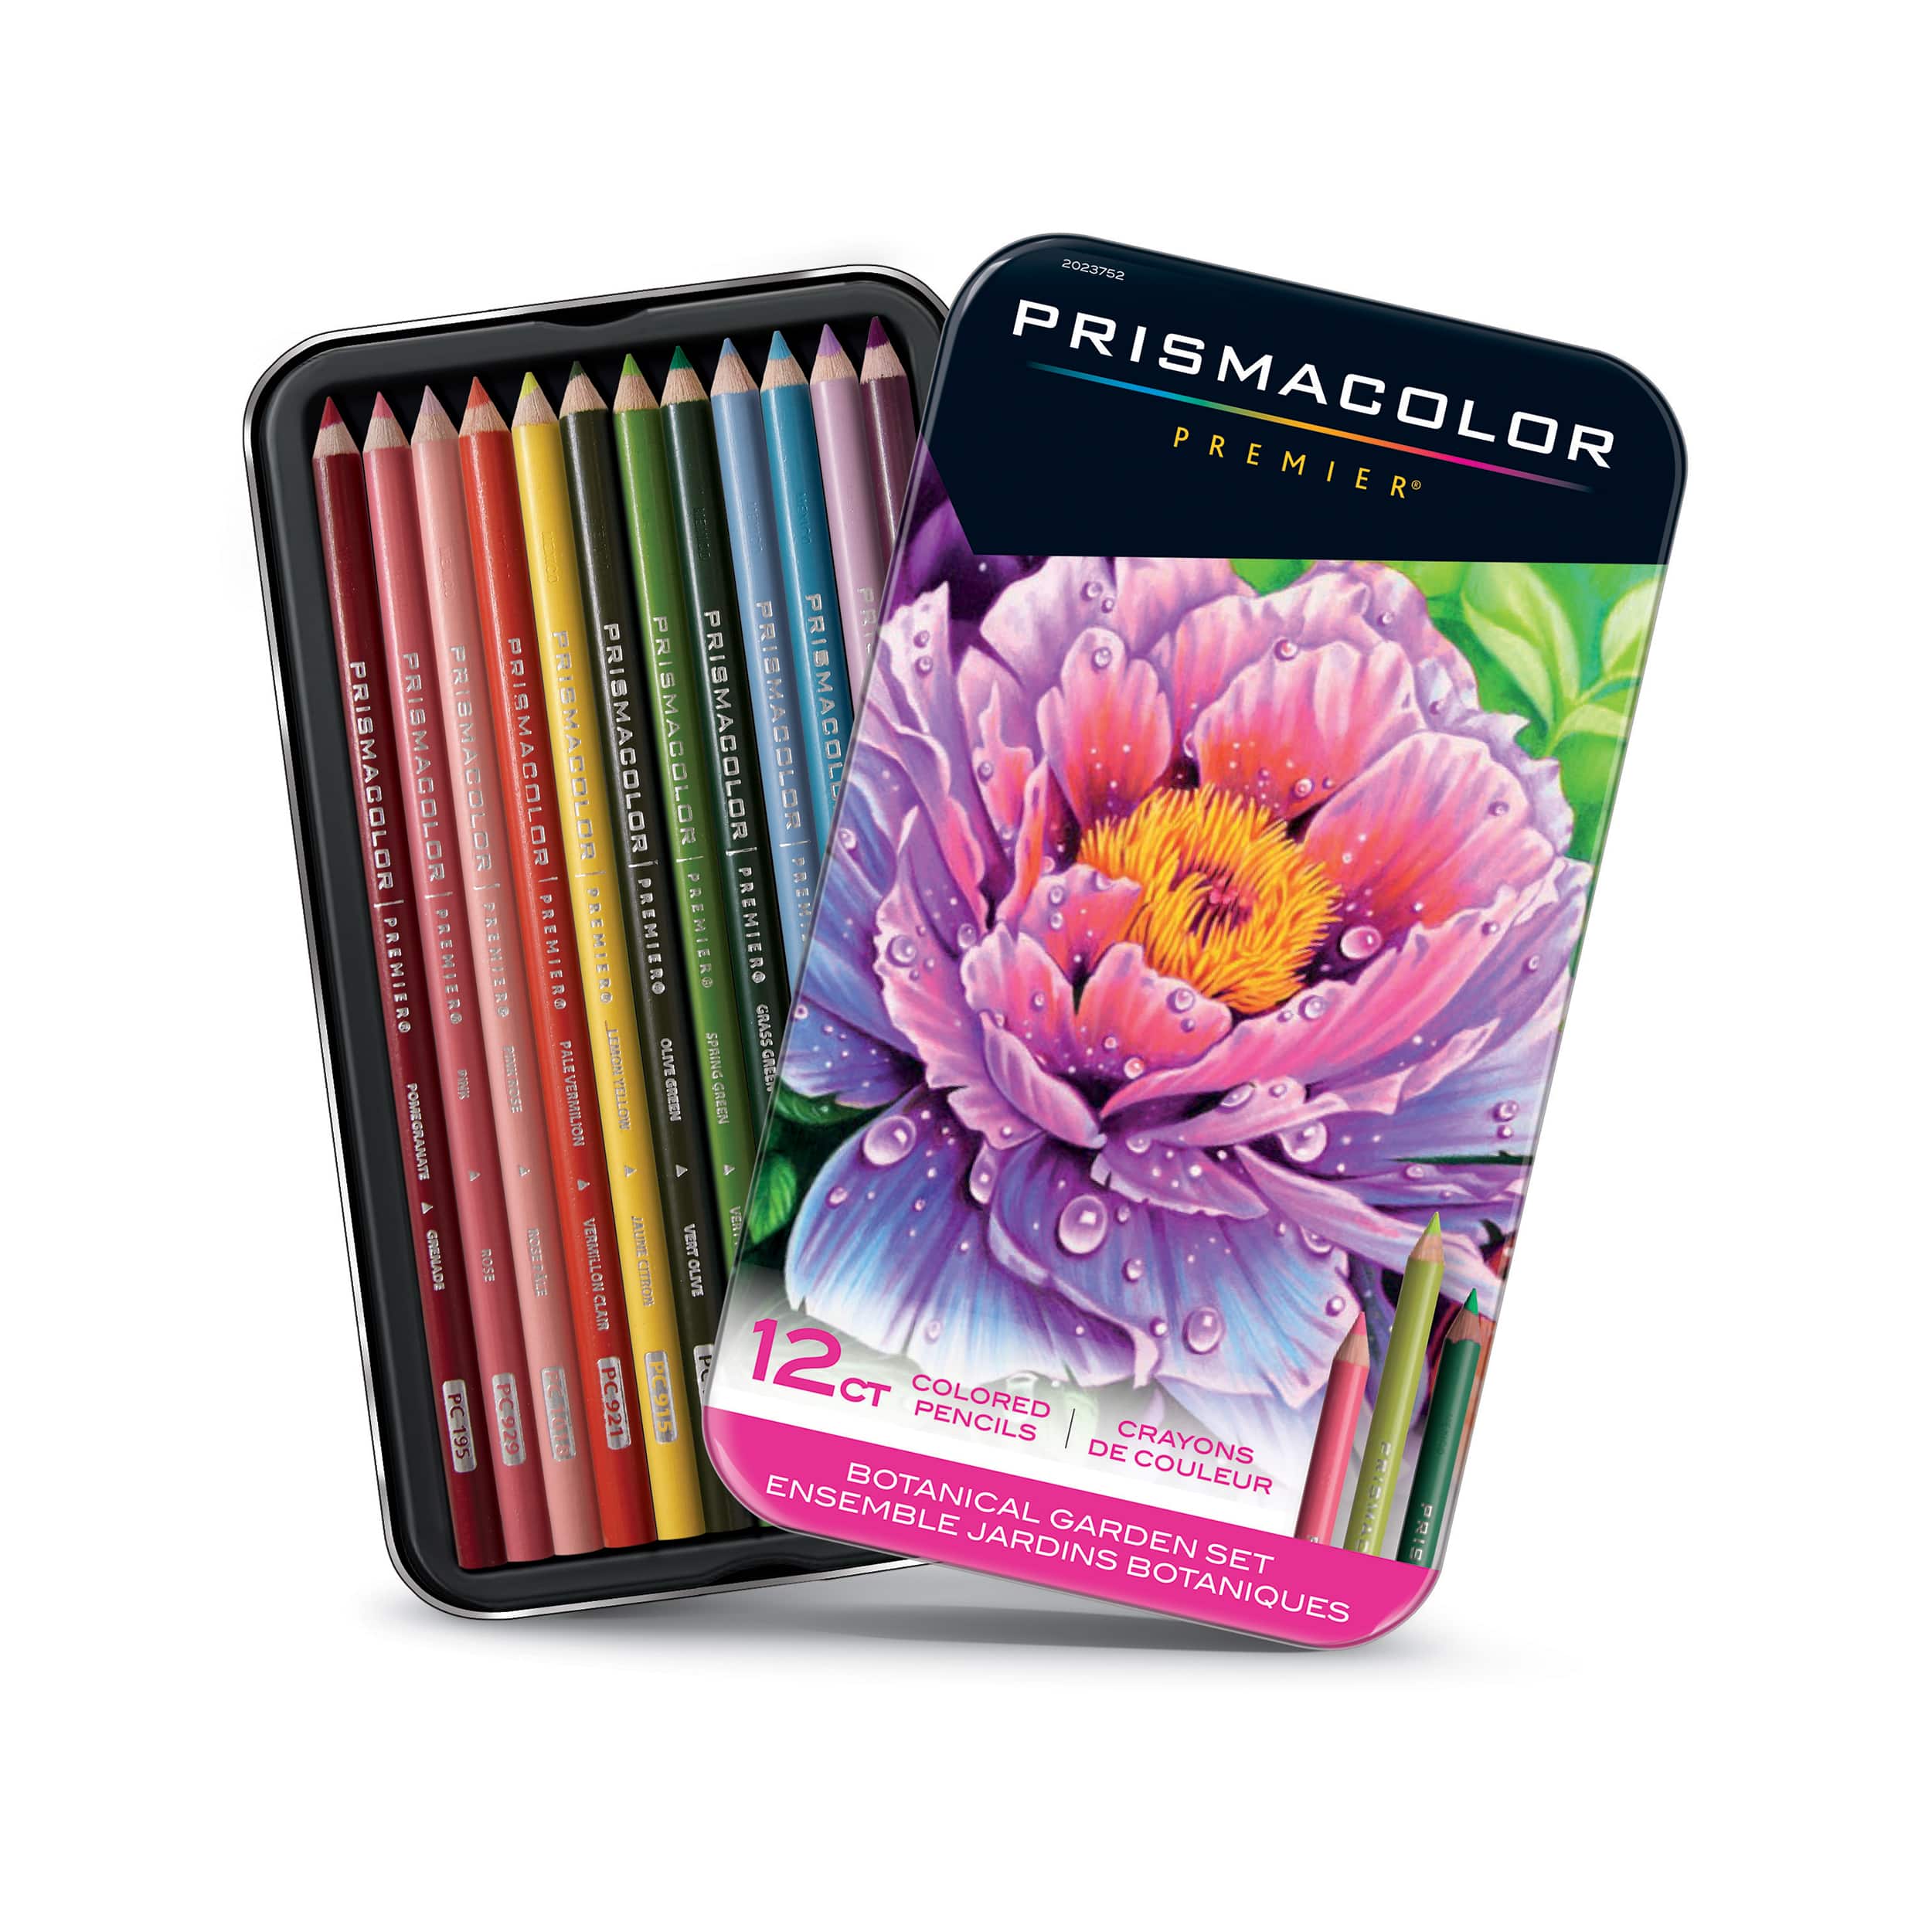 12ct Pro Colored Pencils with Case - Colored Pencils - Art Supplies & Painting